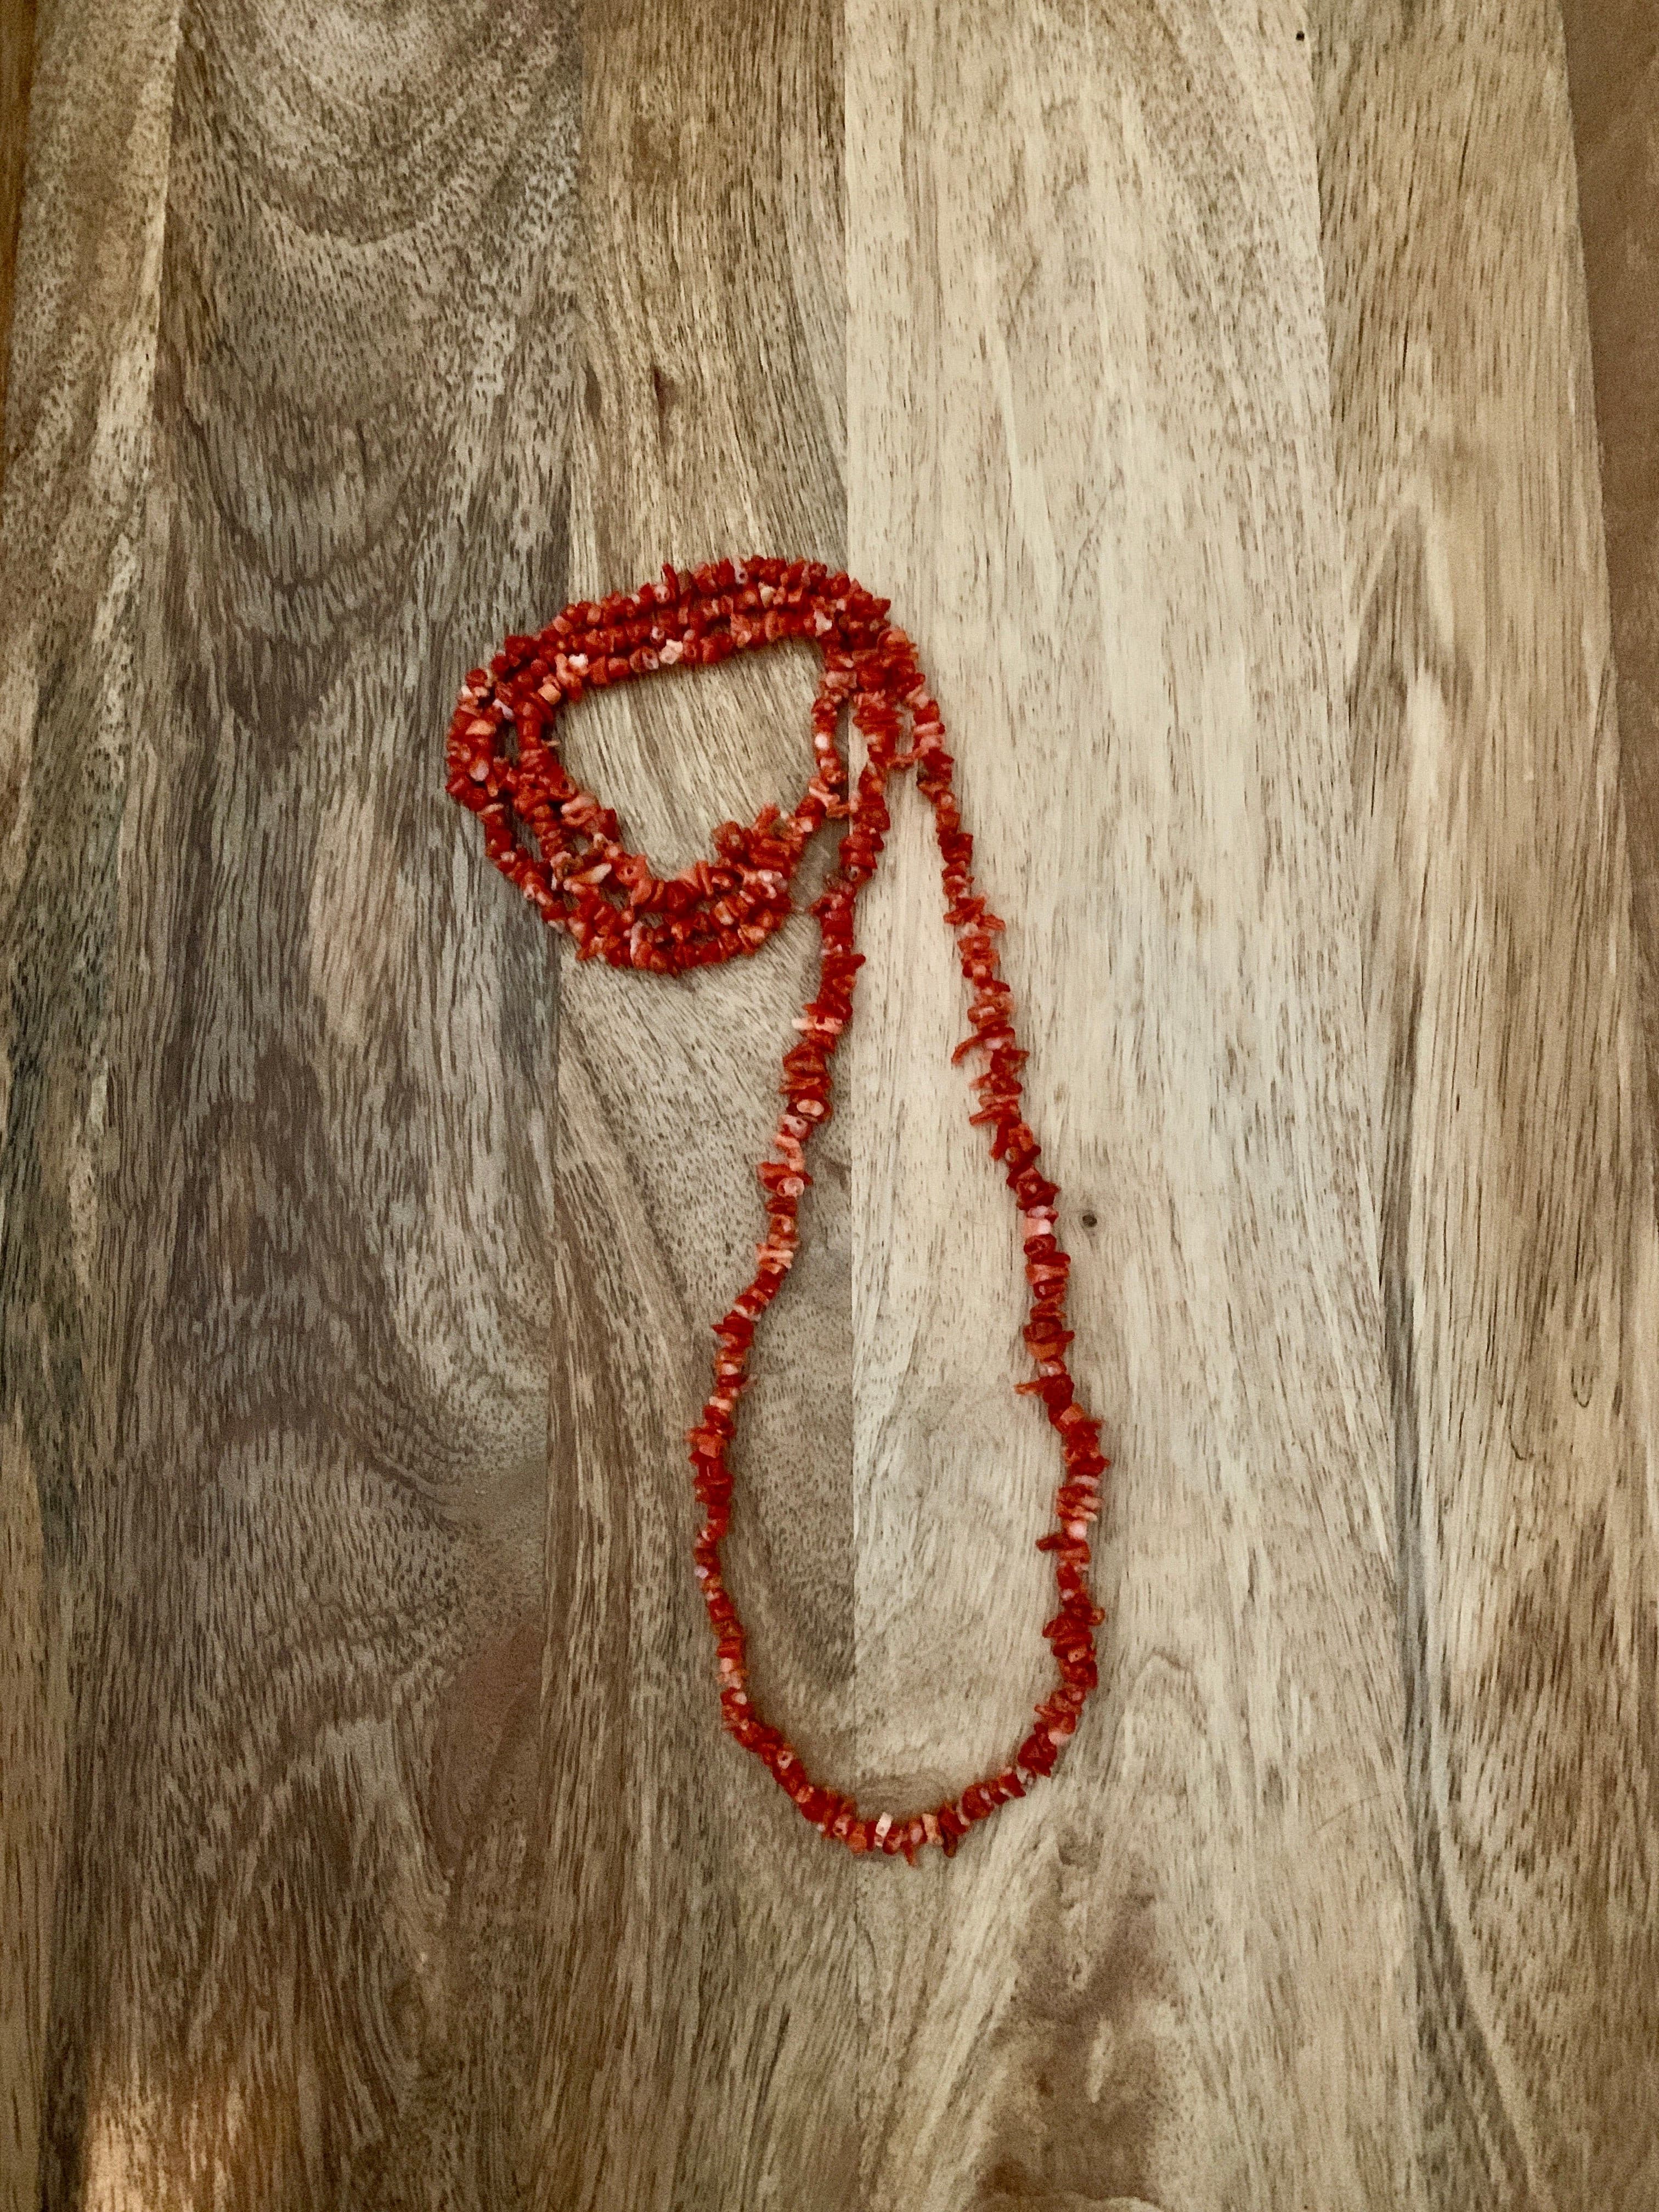 Genuine Natural Coral Necklace.